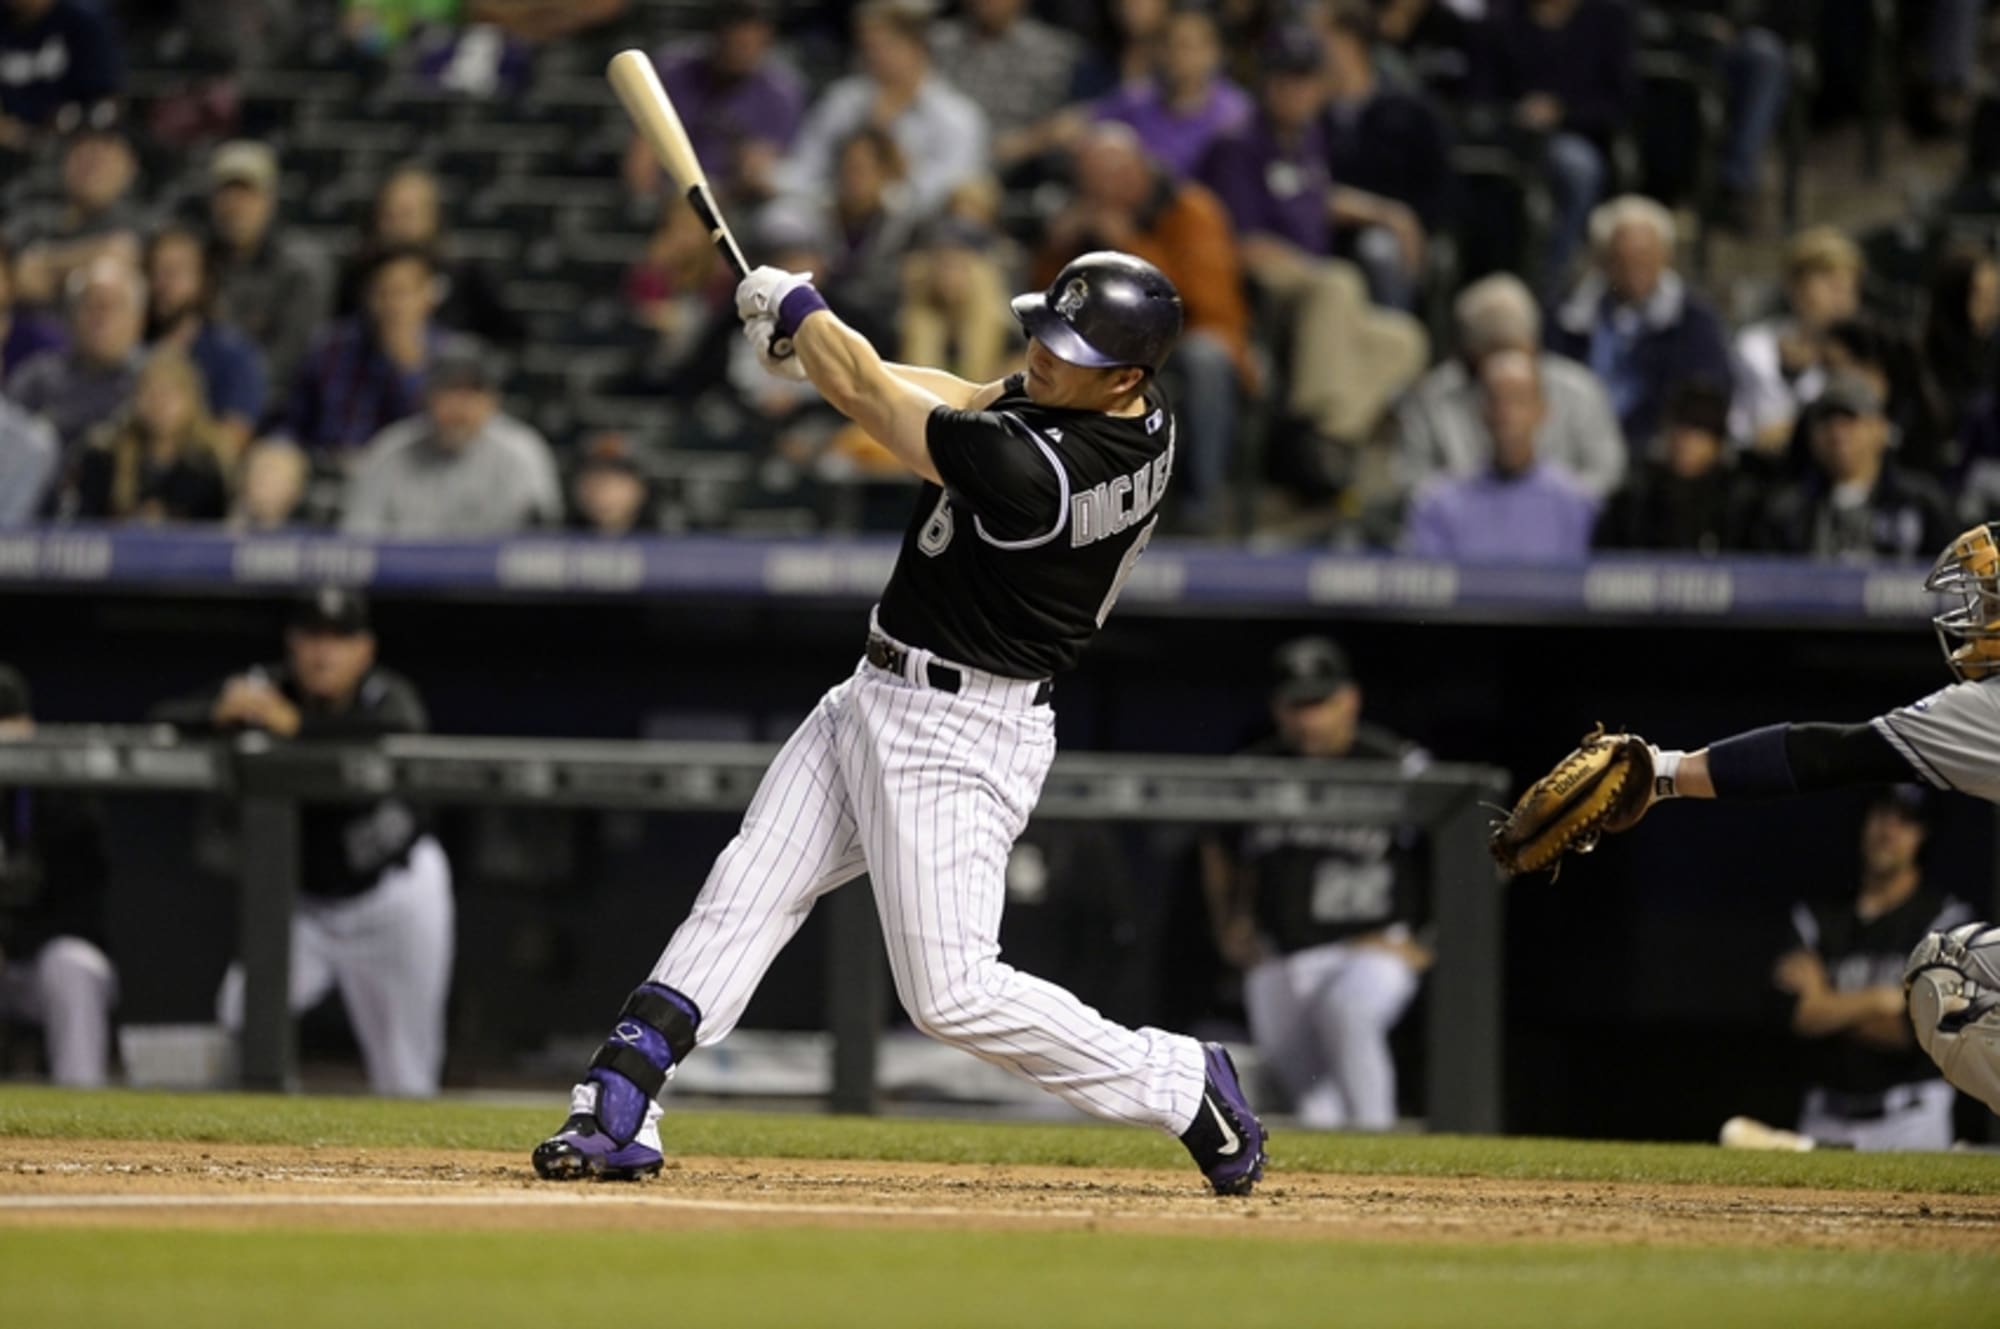 Colorado Rockies trade Corey Dickerson and prospect to Rays for